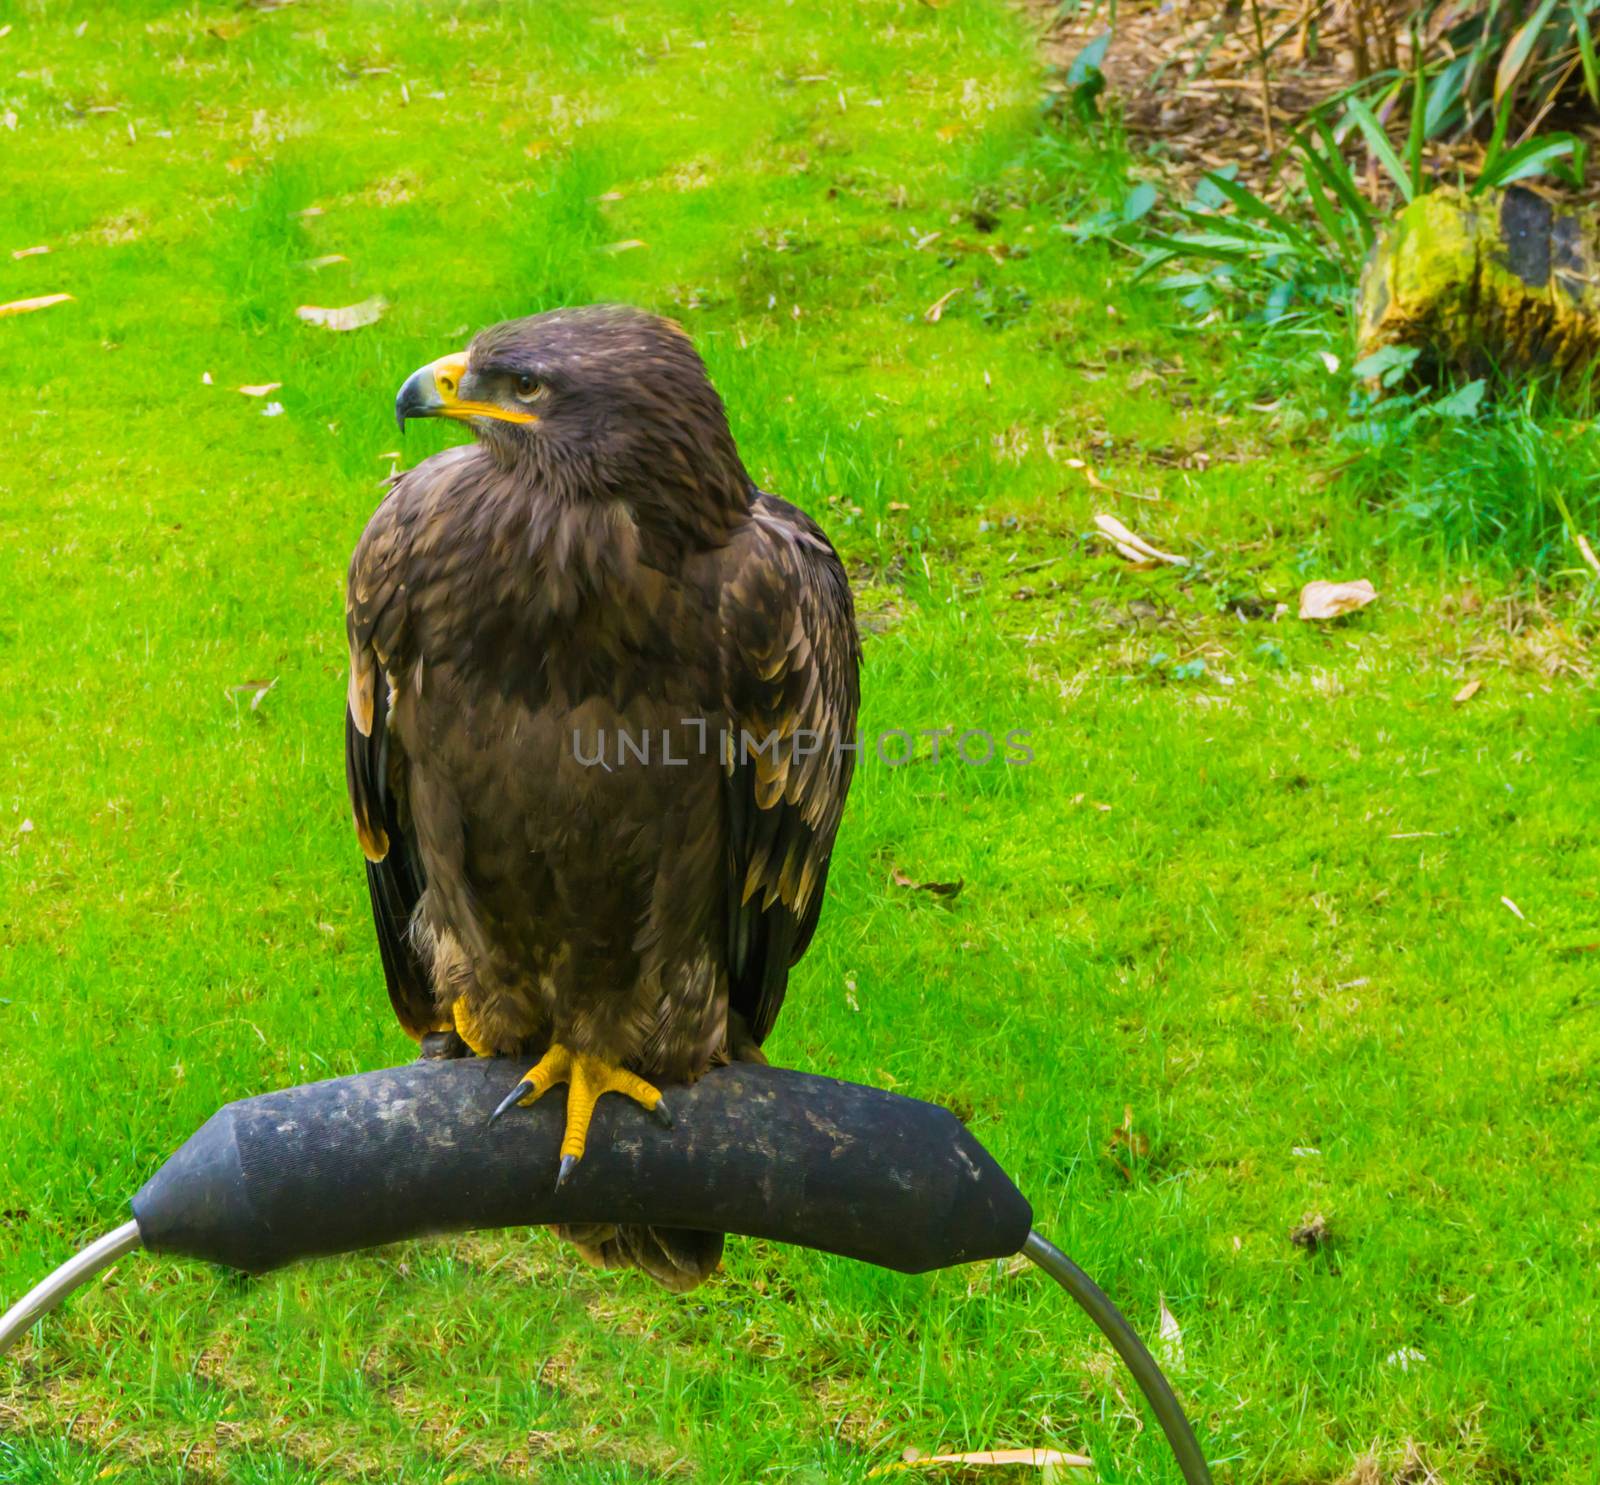 young immature brown bald eagle also known as the sea eagle a beautiful bird of prey portrait by charlottebleijenberg